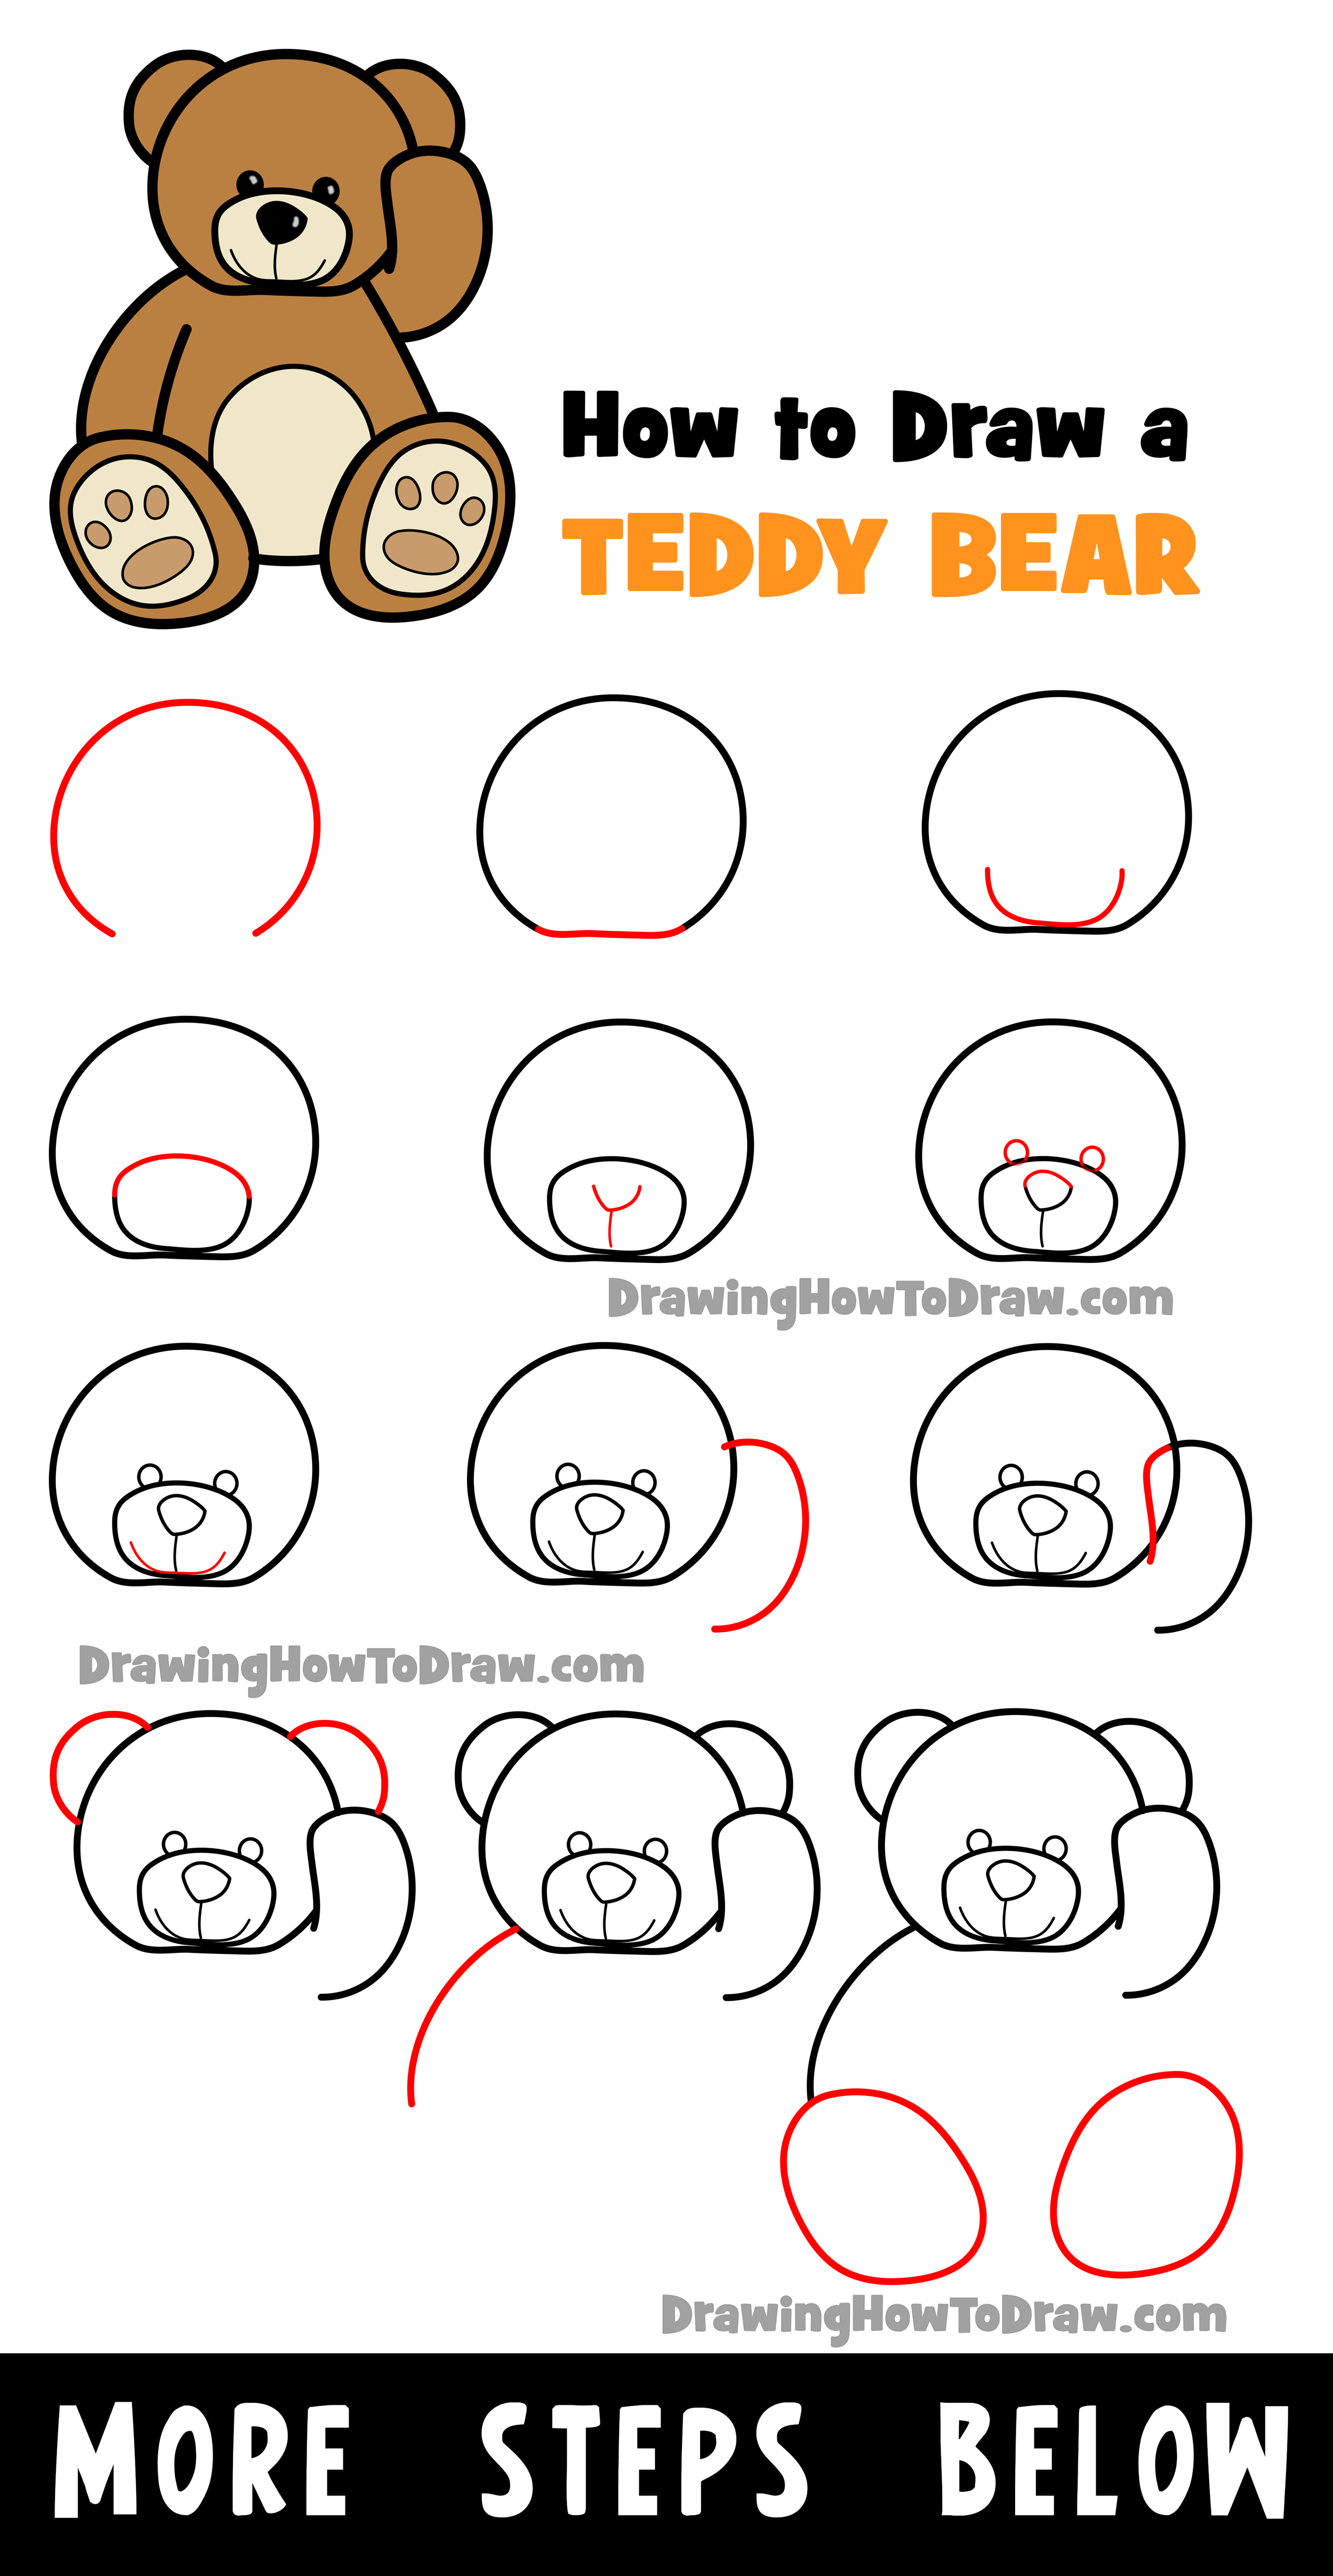 How To Draw A Halloween Teddybear, Step by Step, Drawing Guide, by ErinG30  - DragoArt